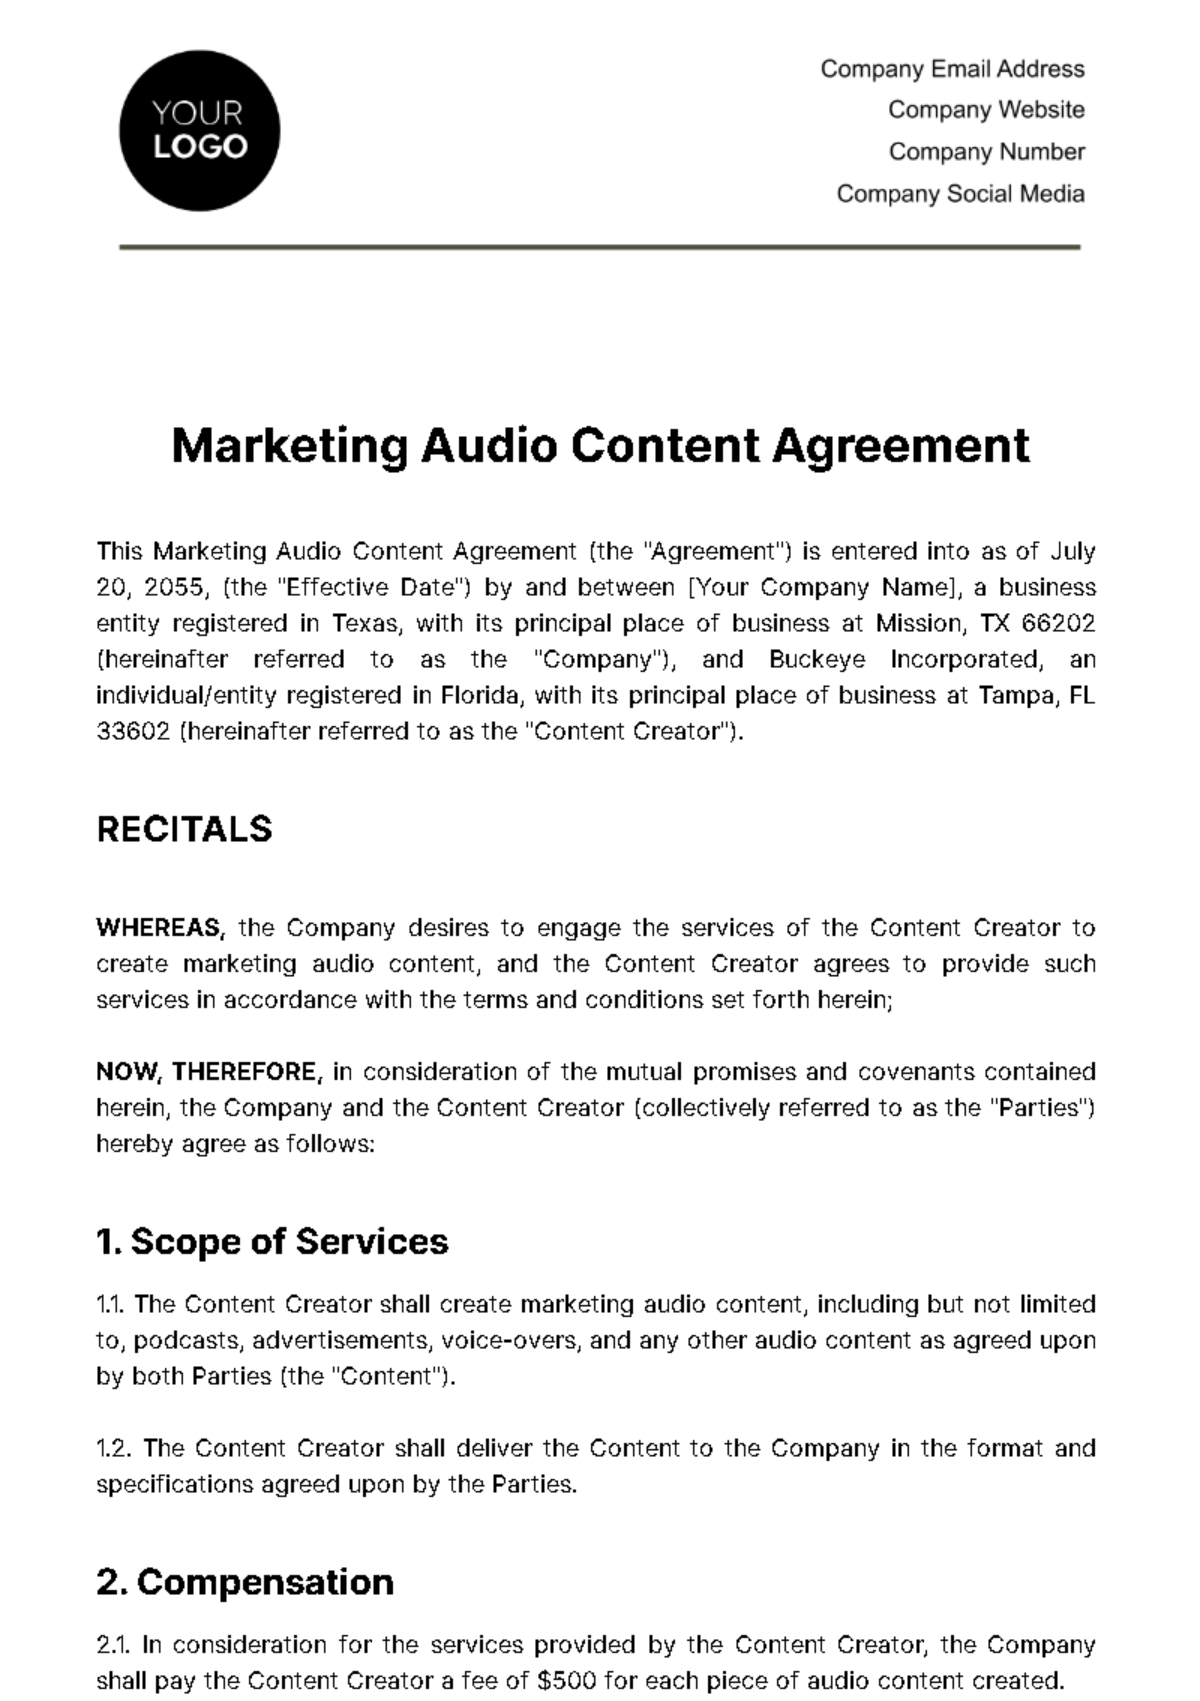 Free Marketing Audio Content Agreement Template